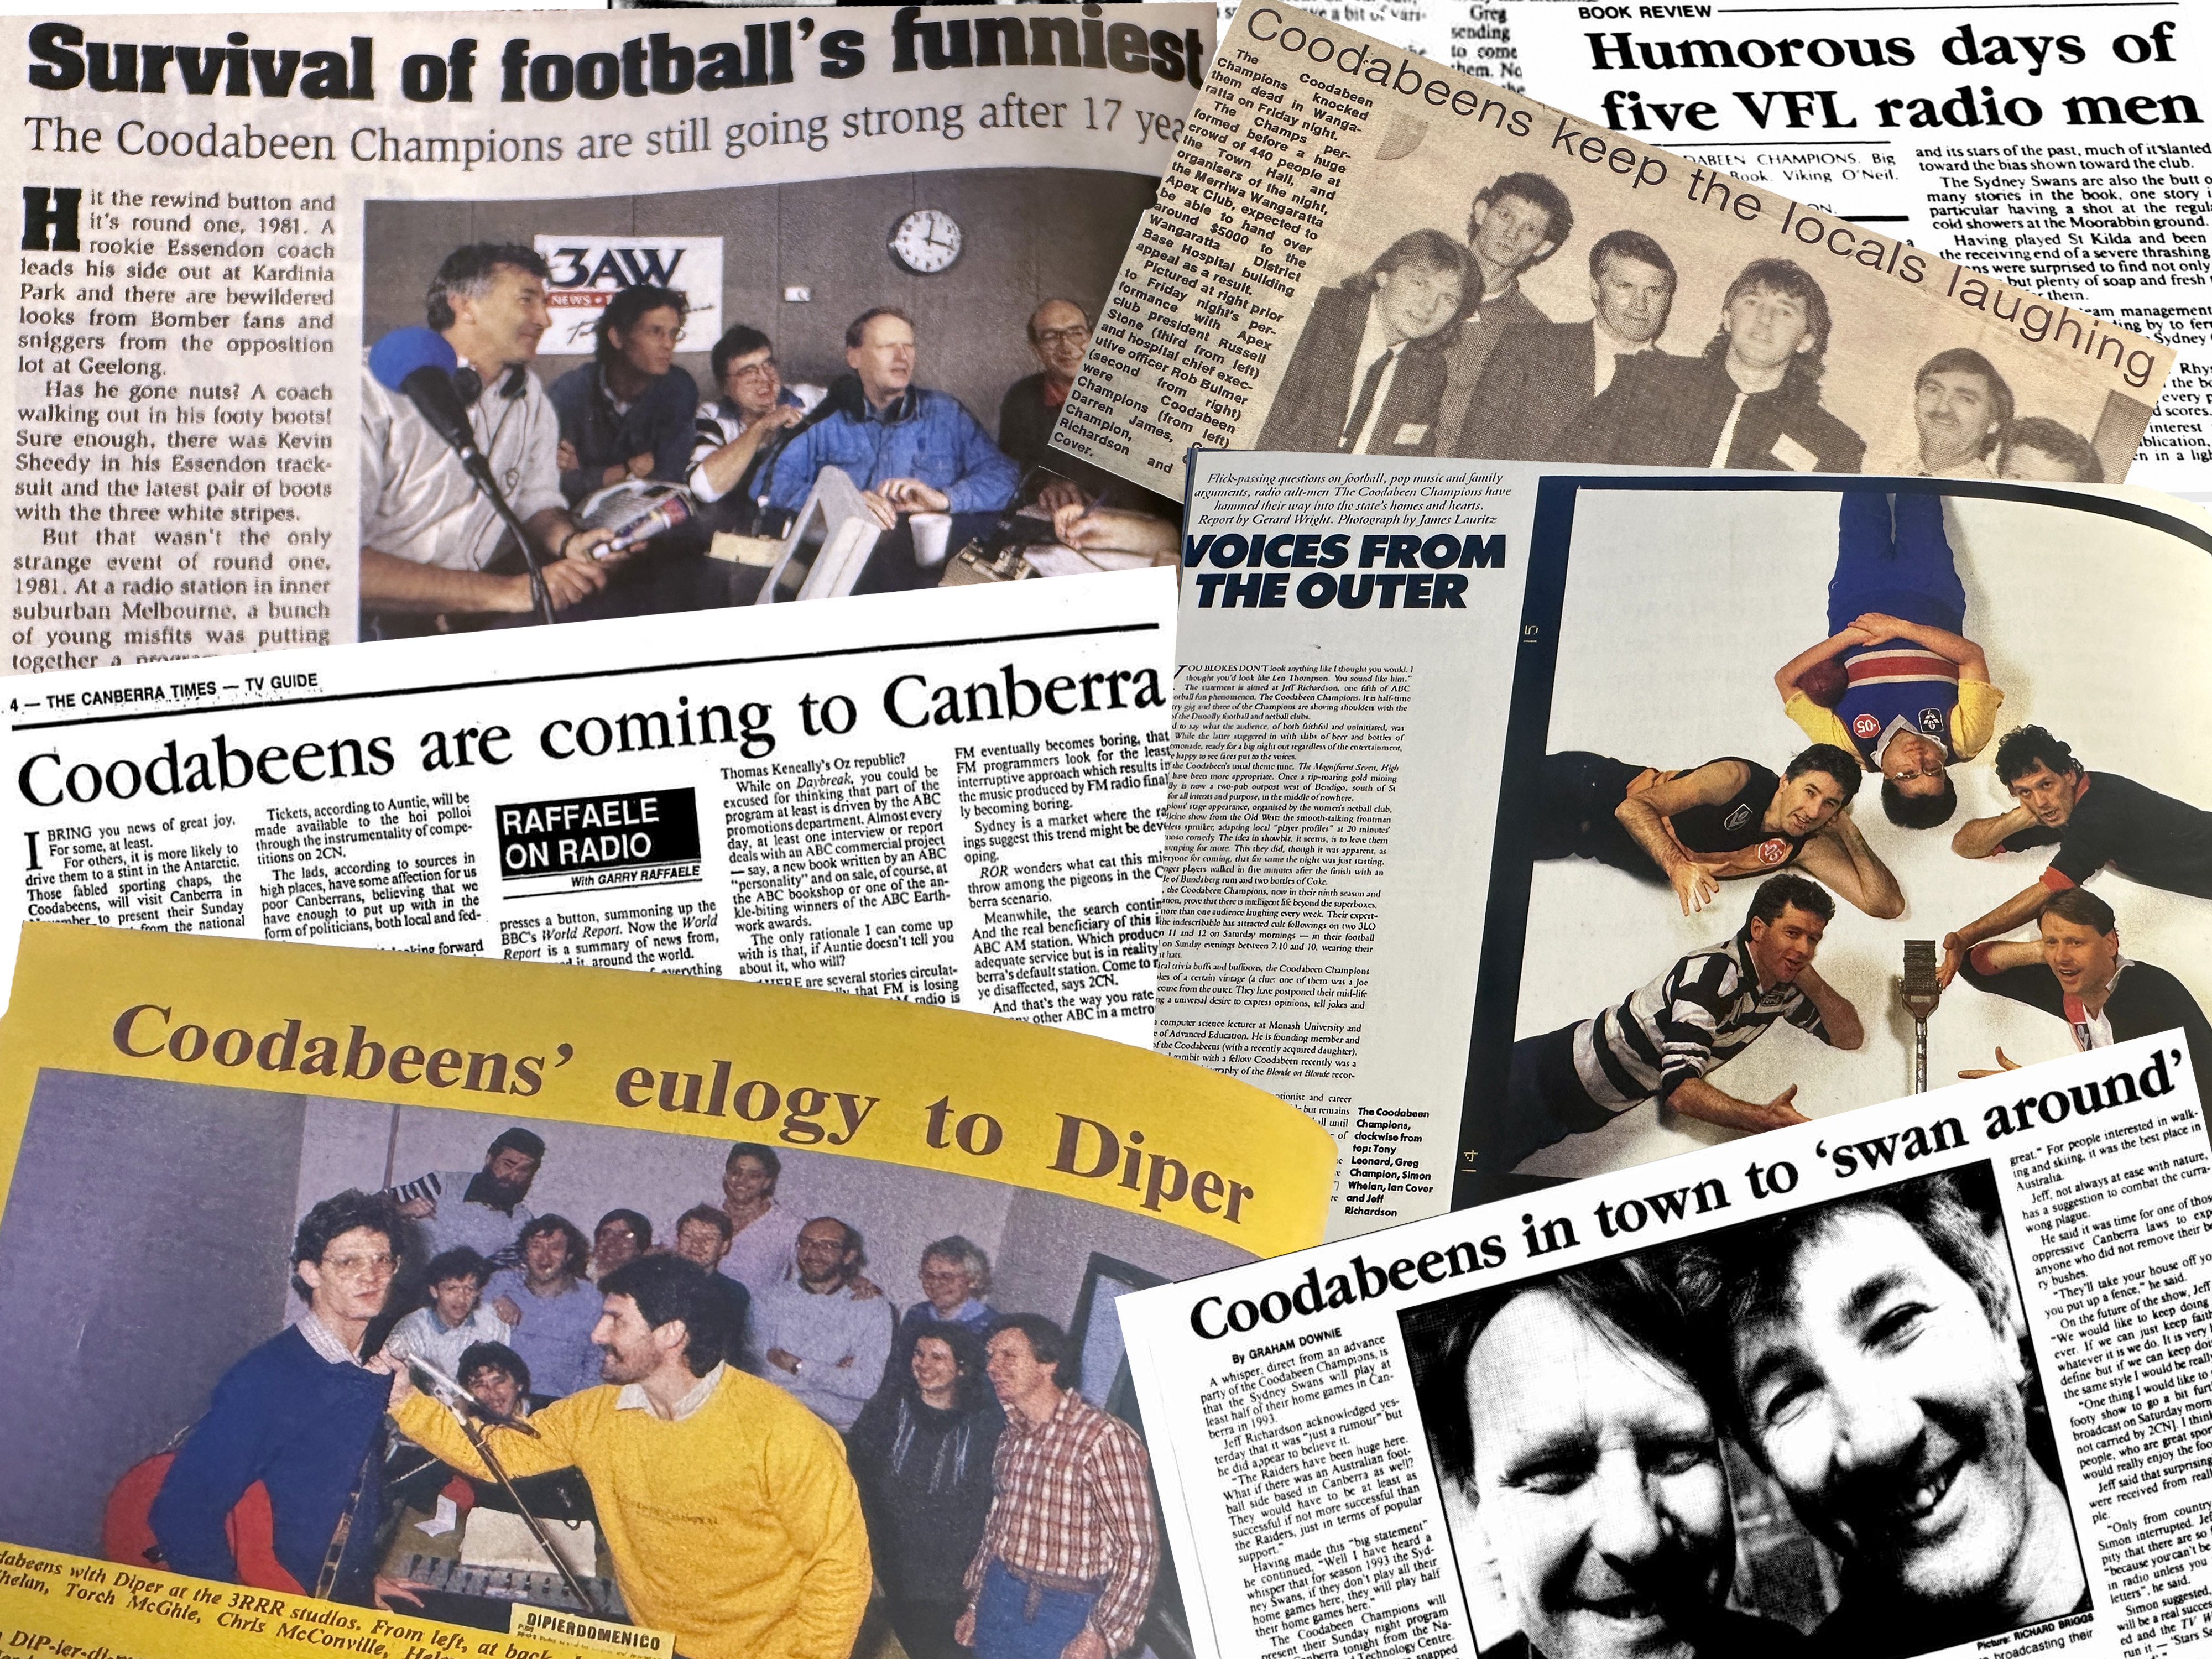 A collage of newspaper clippings of the Coodabeen Champions